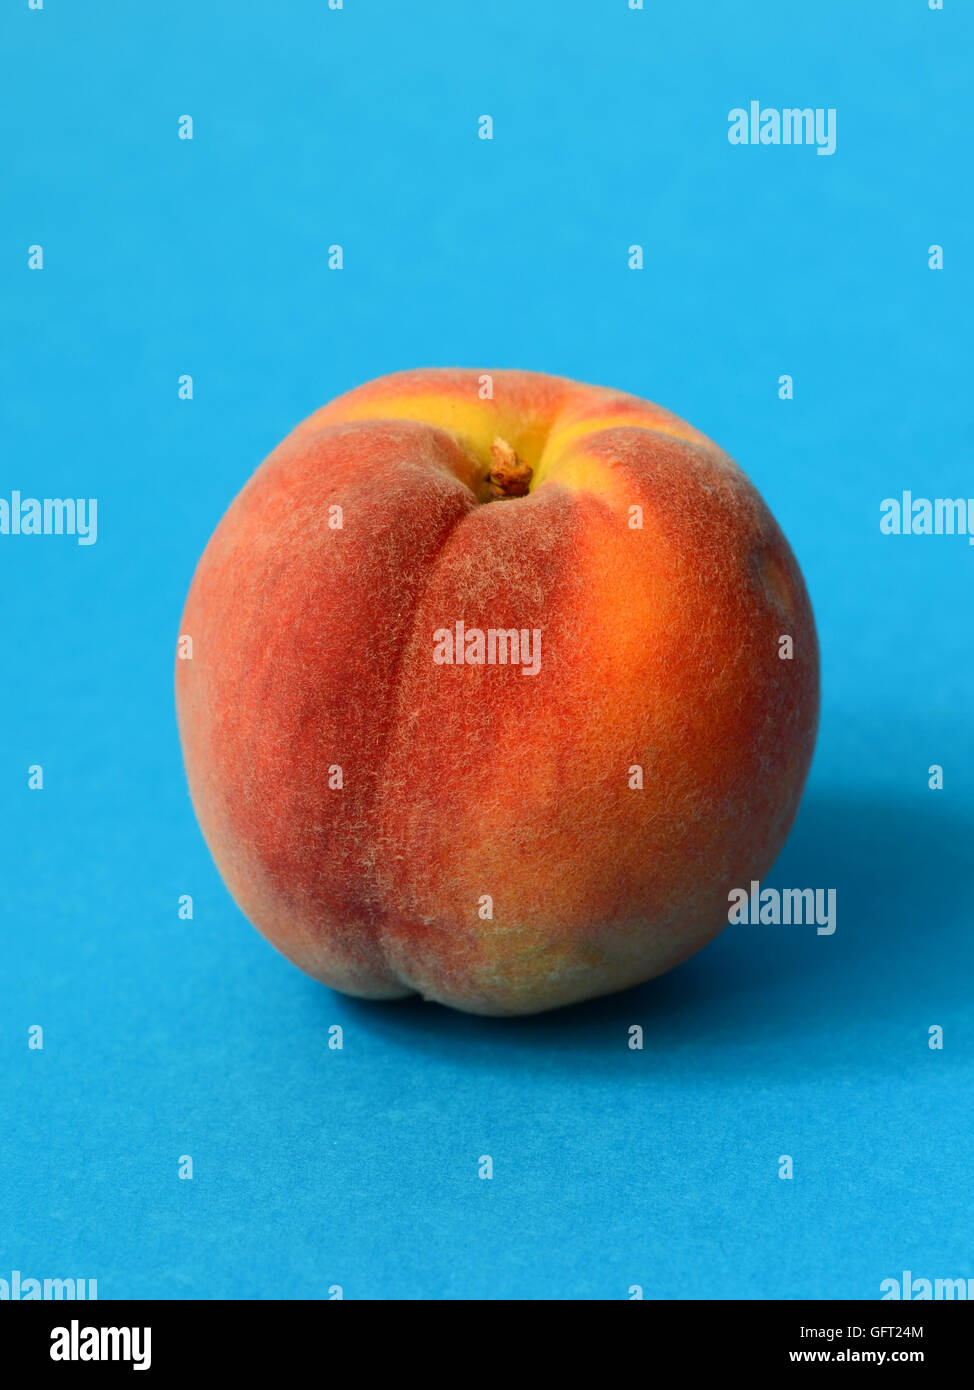 One ripe peach on a blue background Stock Photo